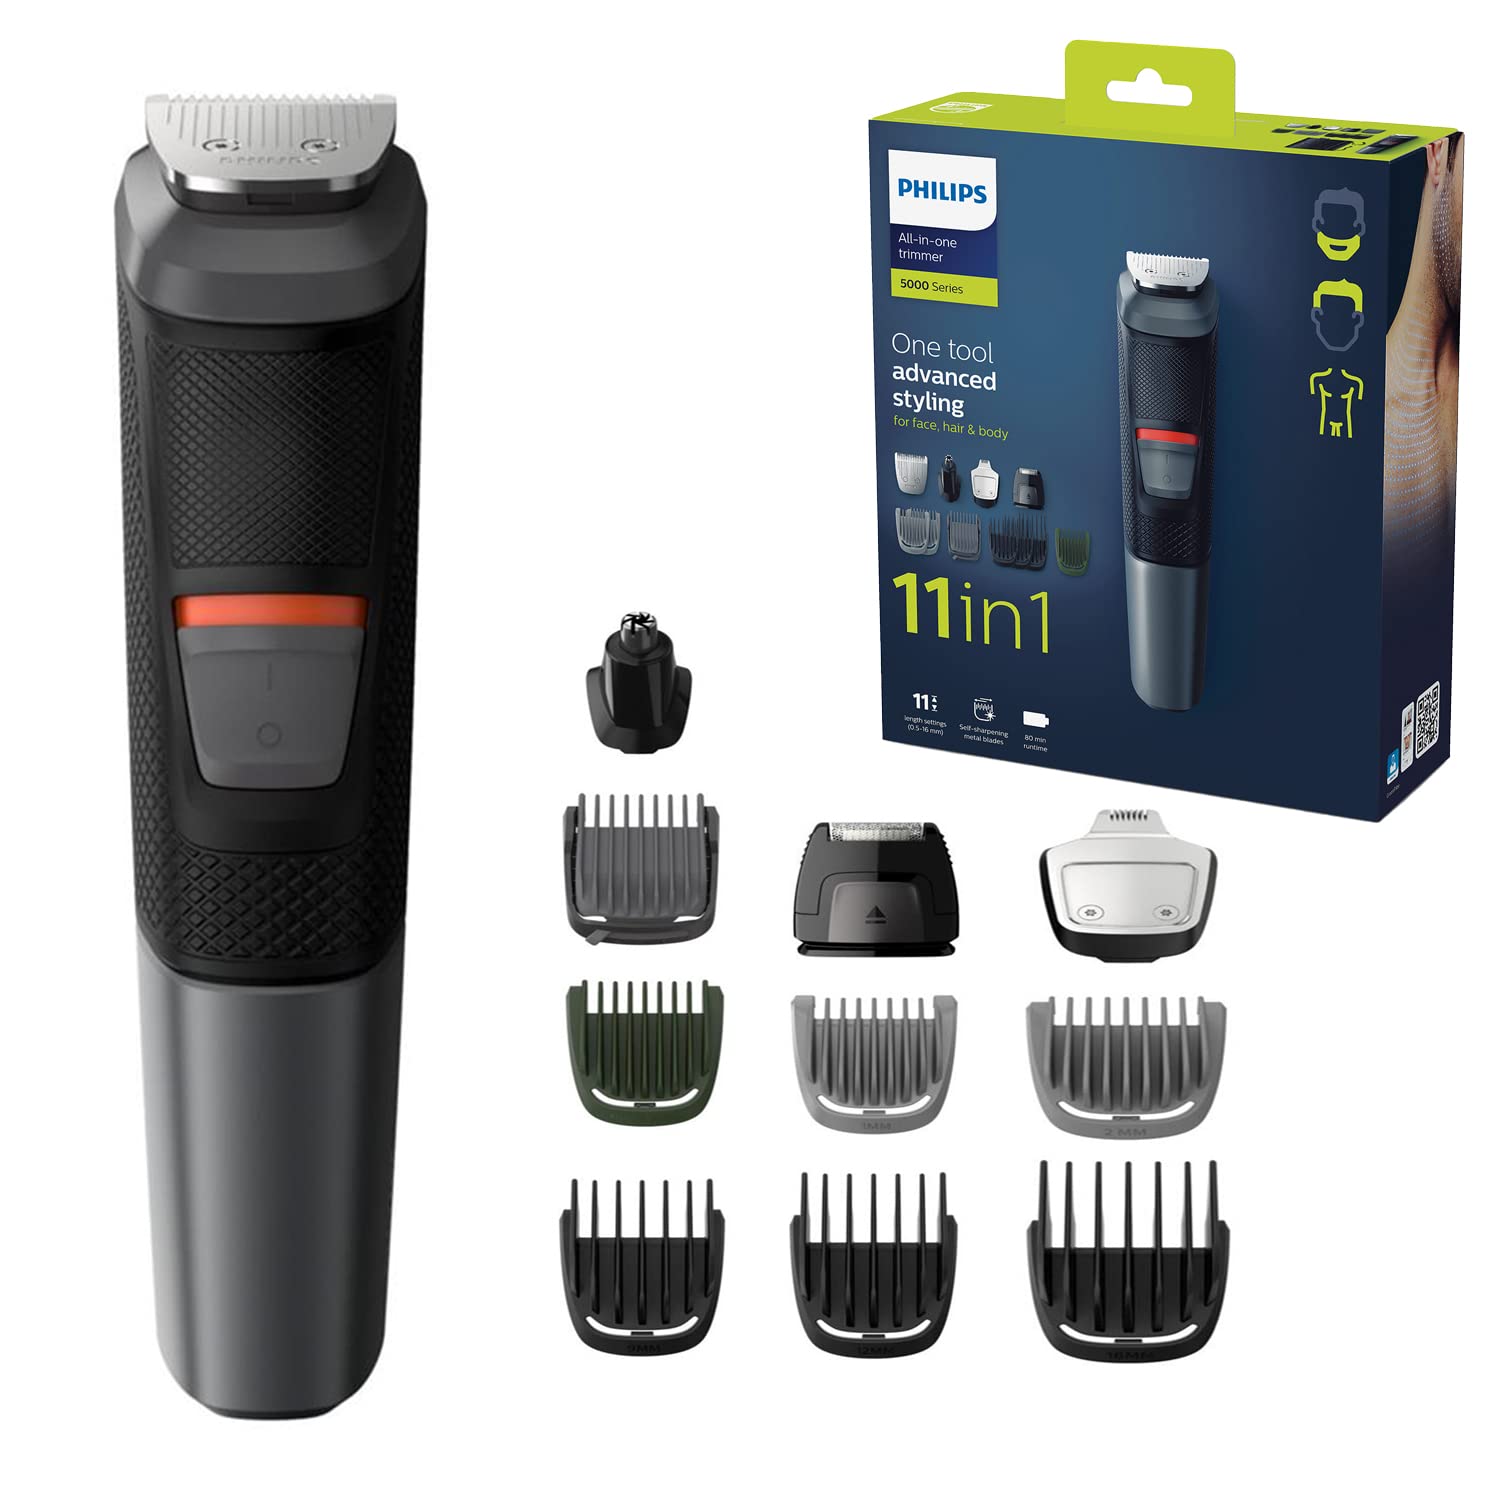 Philips 11-In-1 All-In-One Trimmer, Series 5000 Grooming Kit For Beard, Hair & Body With 11 Attachments, , Mg573033, Blackred